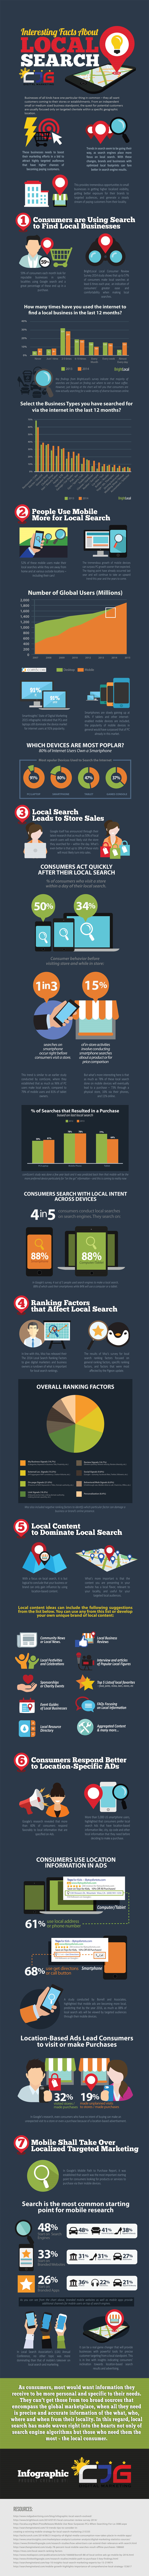 Interesting-Facts-About-Local-Search